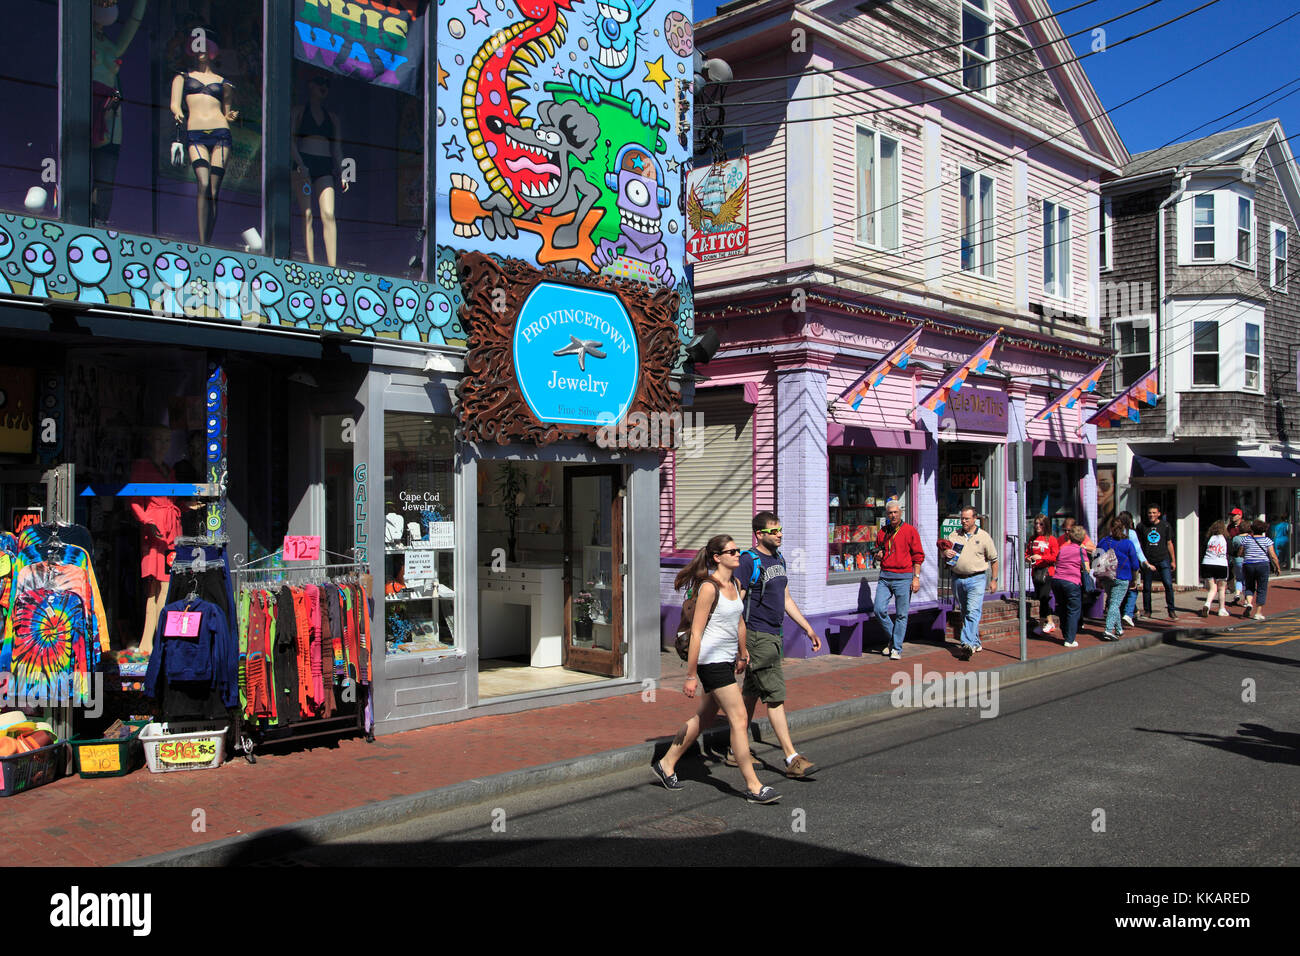 Commercial Street, Provincetown, Cape Cod, Massachusetts, New England, United States of America, North America Stock Photo